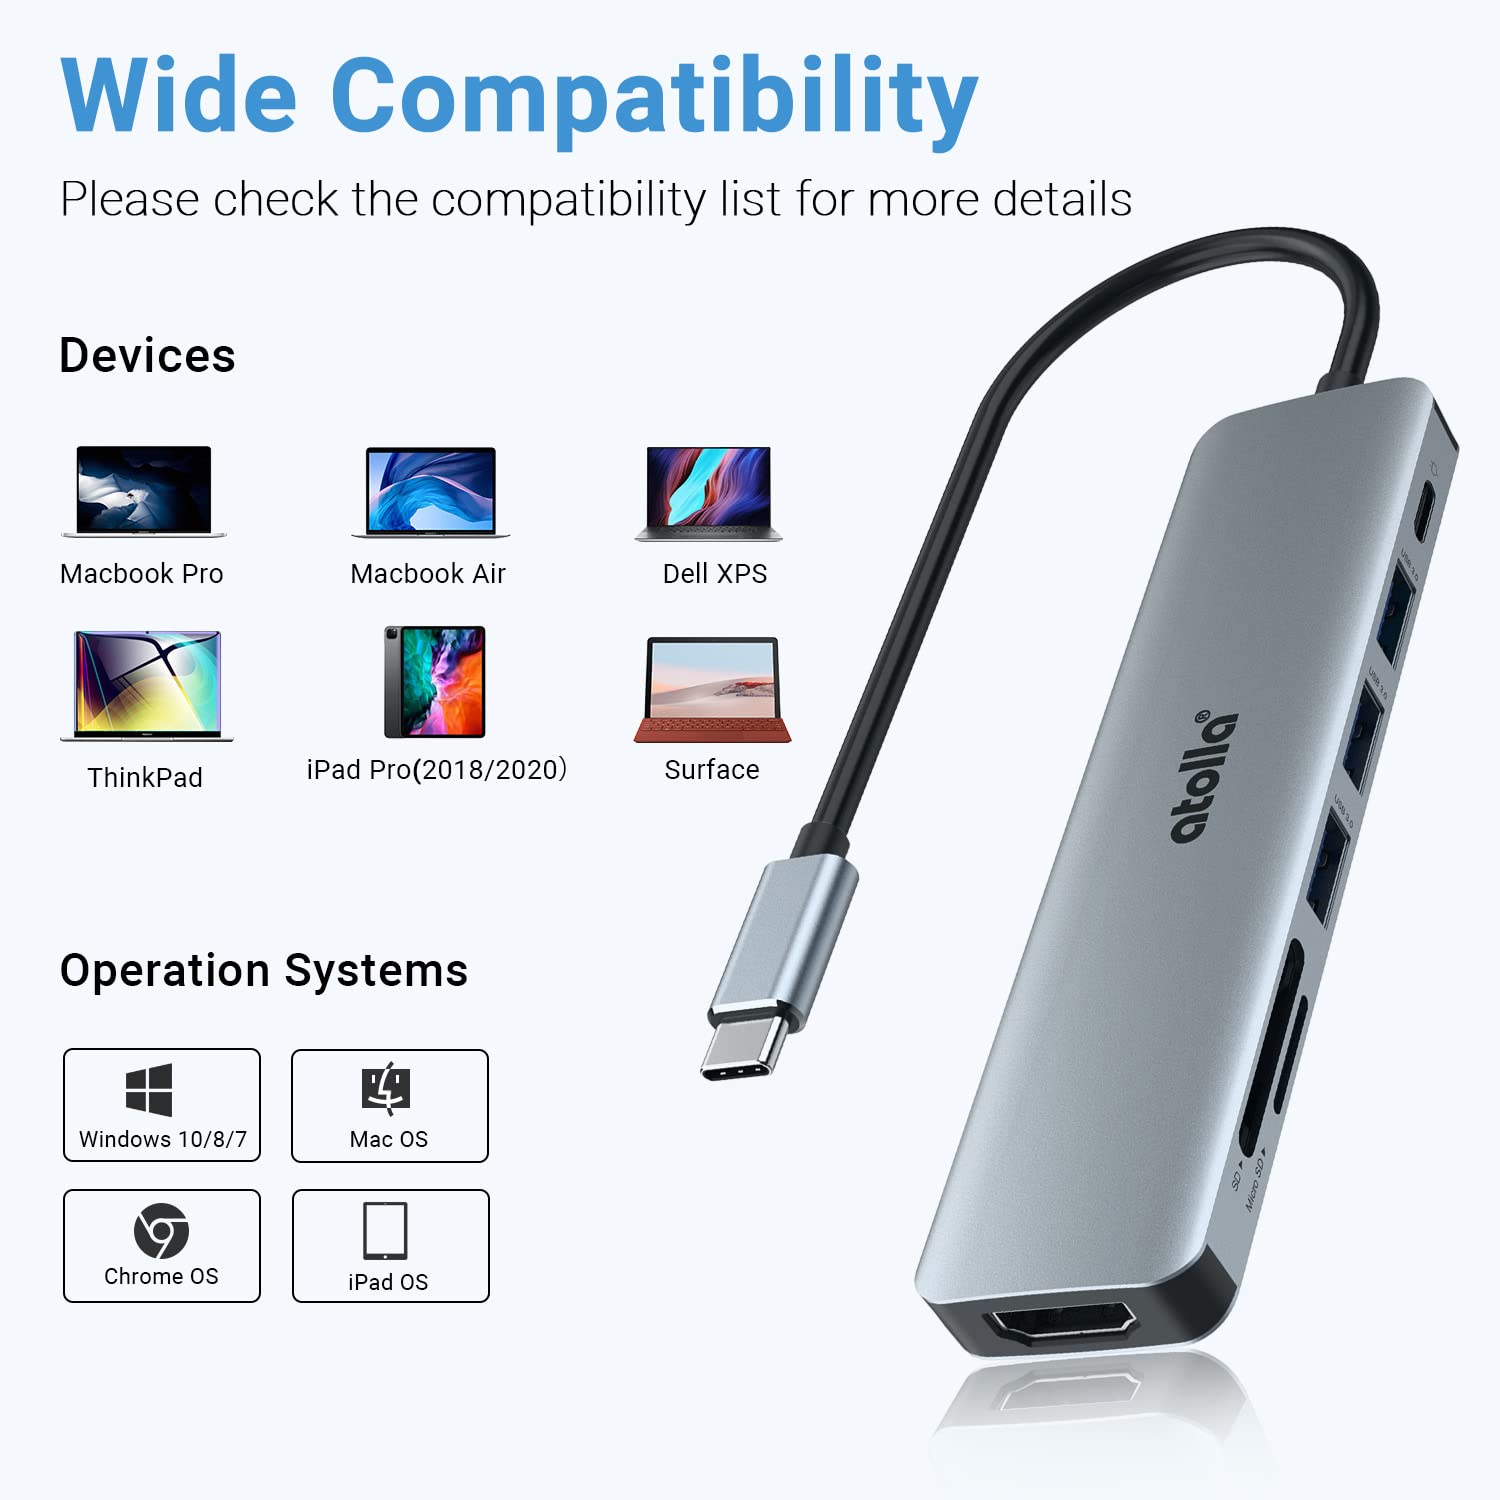 USB C Hub, atolla 7-in-1 USB C Adapter with 4K USB C to HDMI, 100W Power Delivery Port, 3 USB 3.0 Ports, SD/TF Card Reader, USB C Dock for MacBook Pro (Thunderbolt 3) & Other USB Type-C Laptop